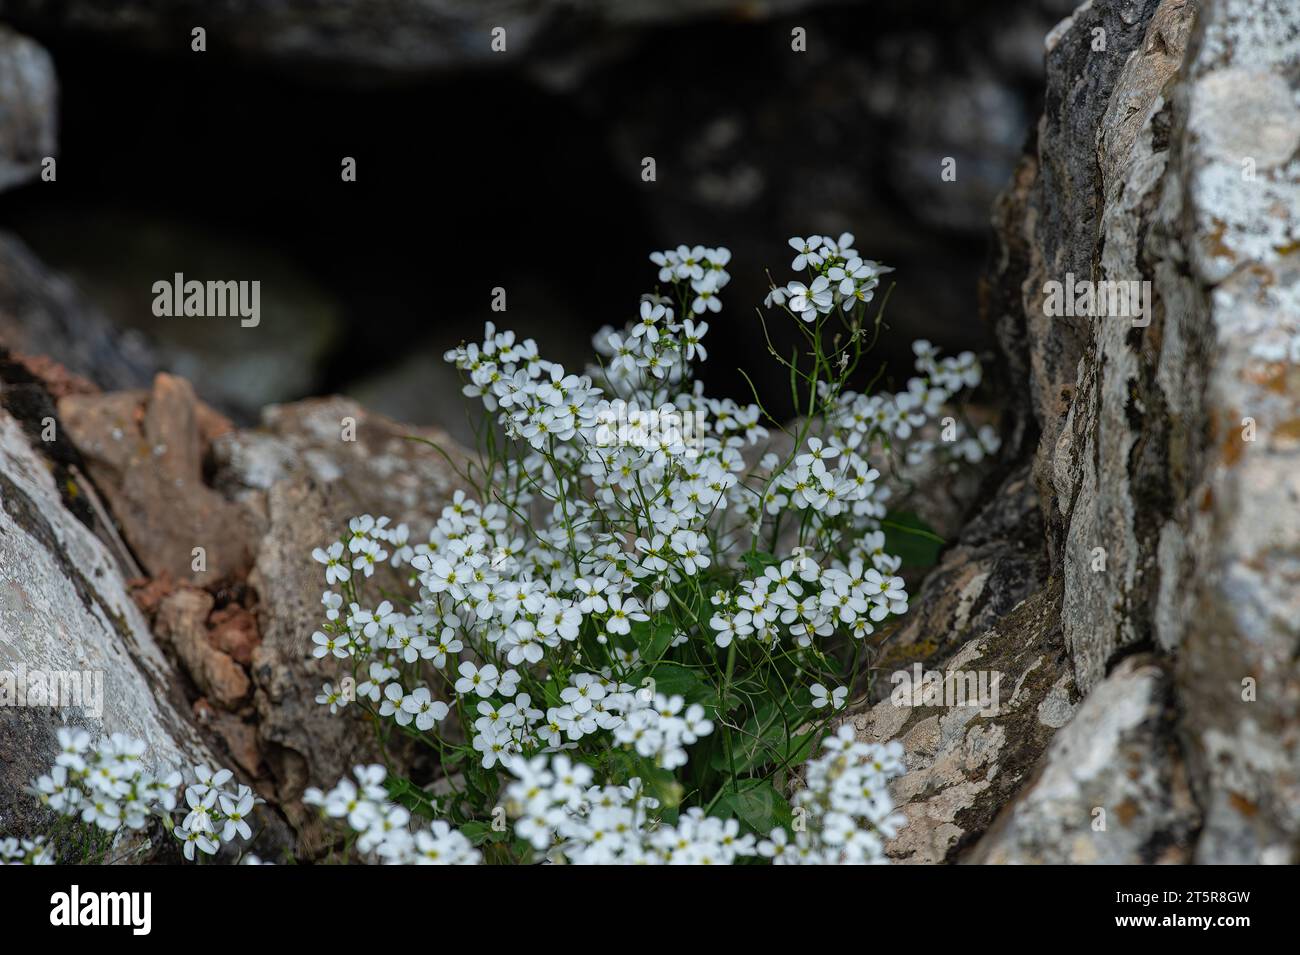 Arabis caucasica arabis mountain rock cress springtime flowering plant, causacian rockcress flowers with white petals in bloom, green leaves Stock Photo